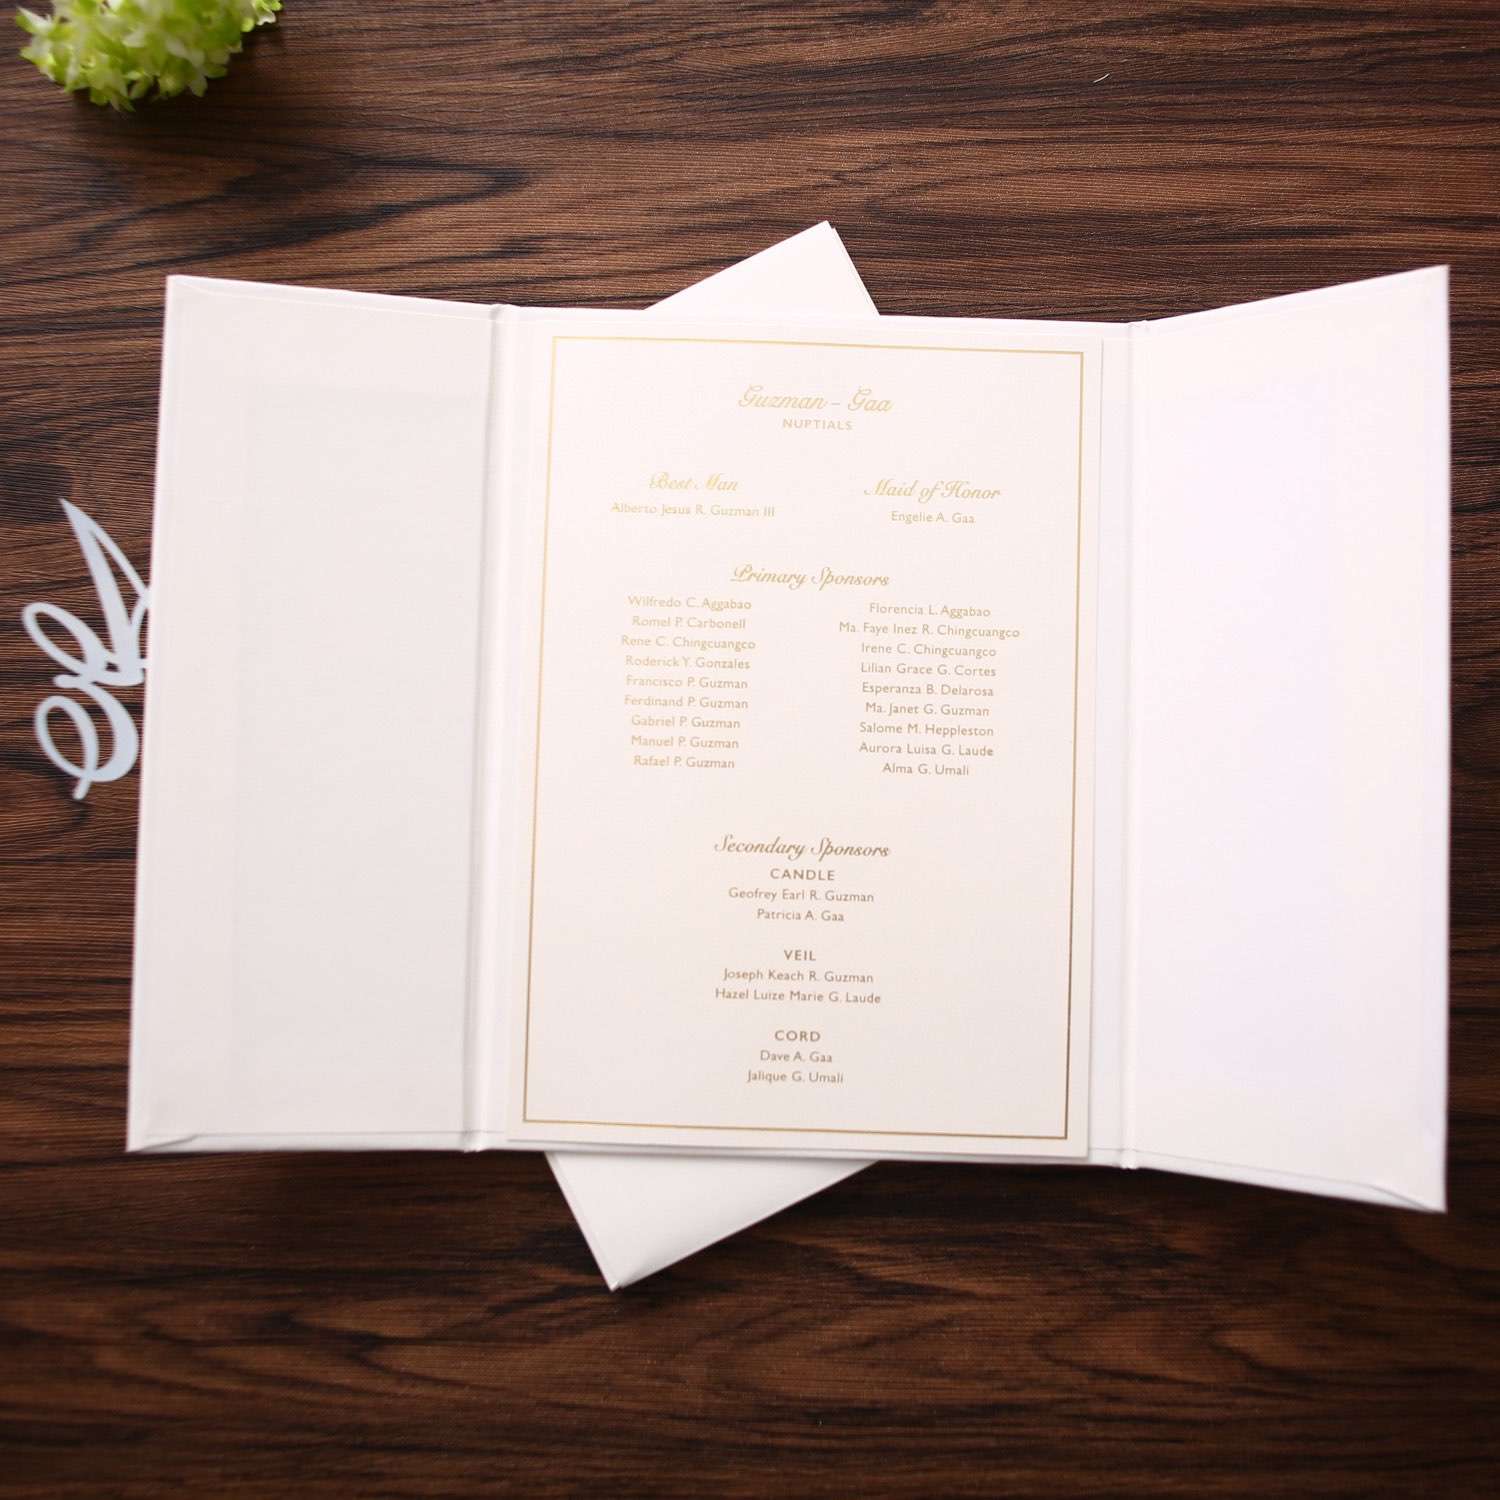 White Wedding Invitation Card With Hard Cover Beautiful Invitation Card With Envelope